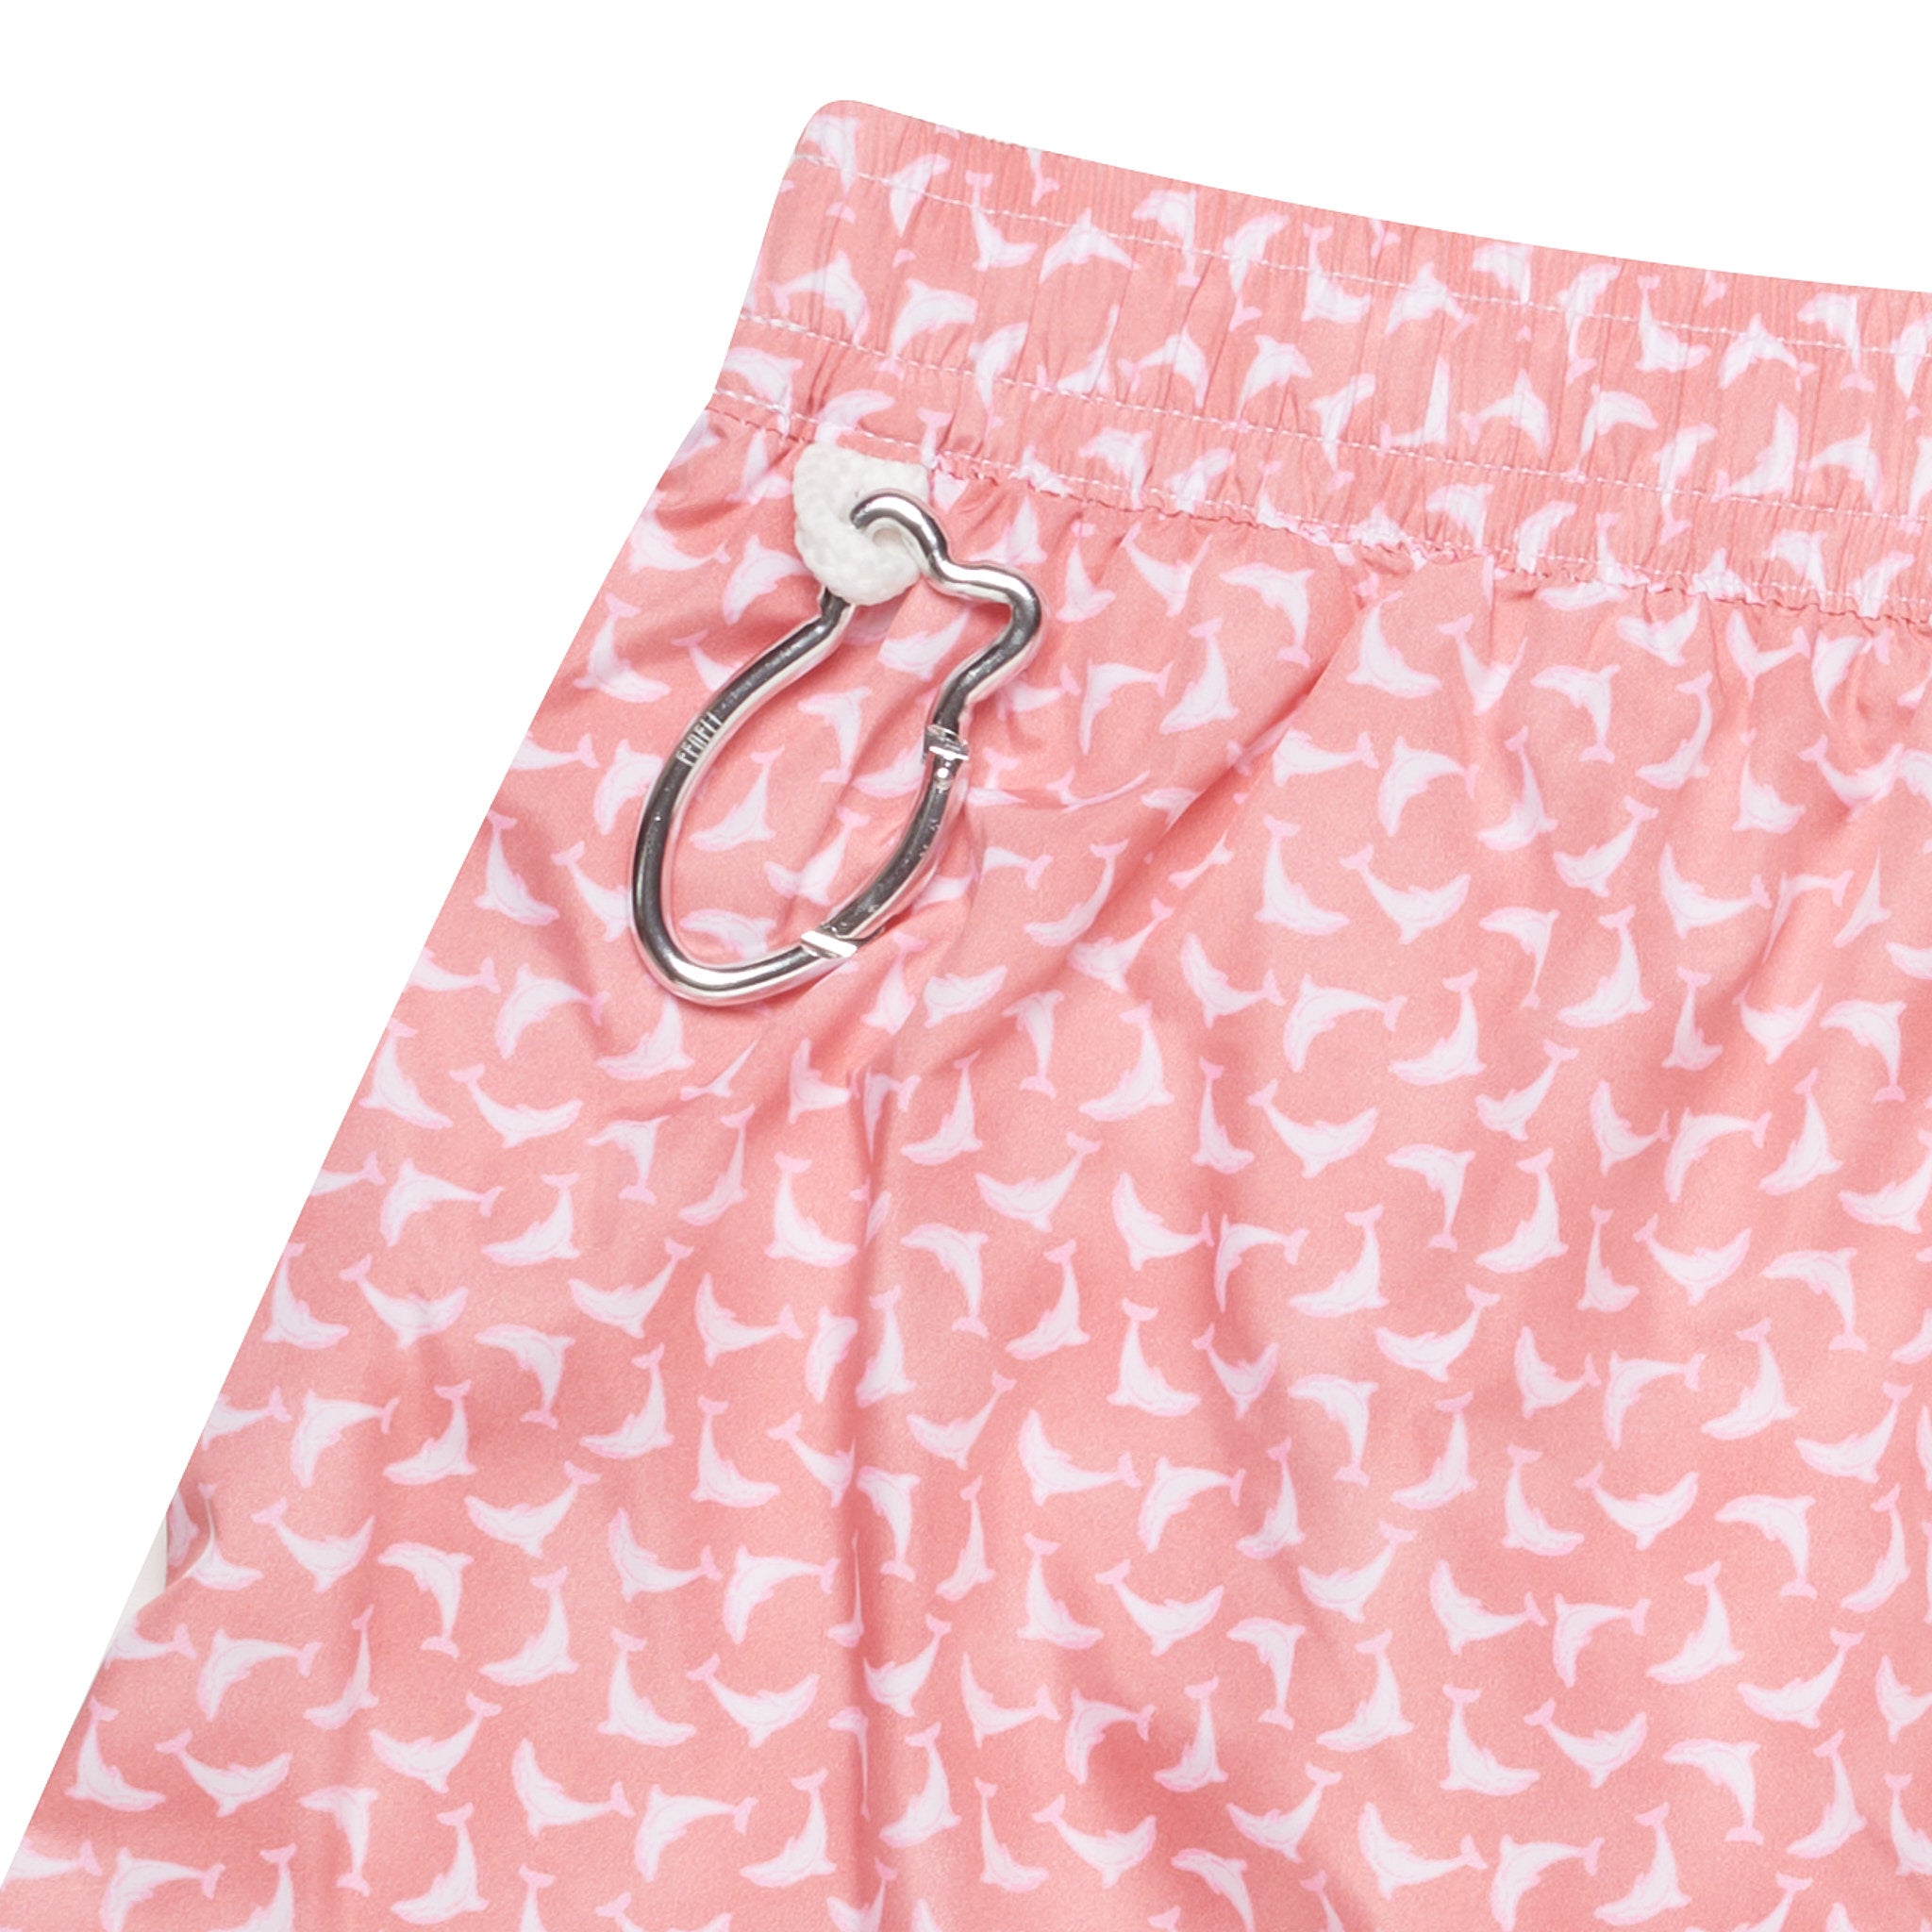 FEDELI Salmon Dolphins Printed Madeira Airstop Swim Shorts Trunks NEW Size 2XL